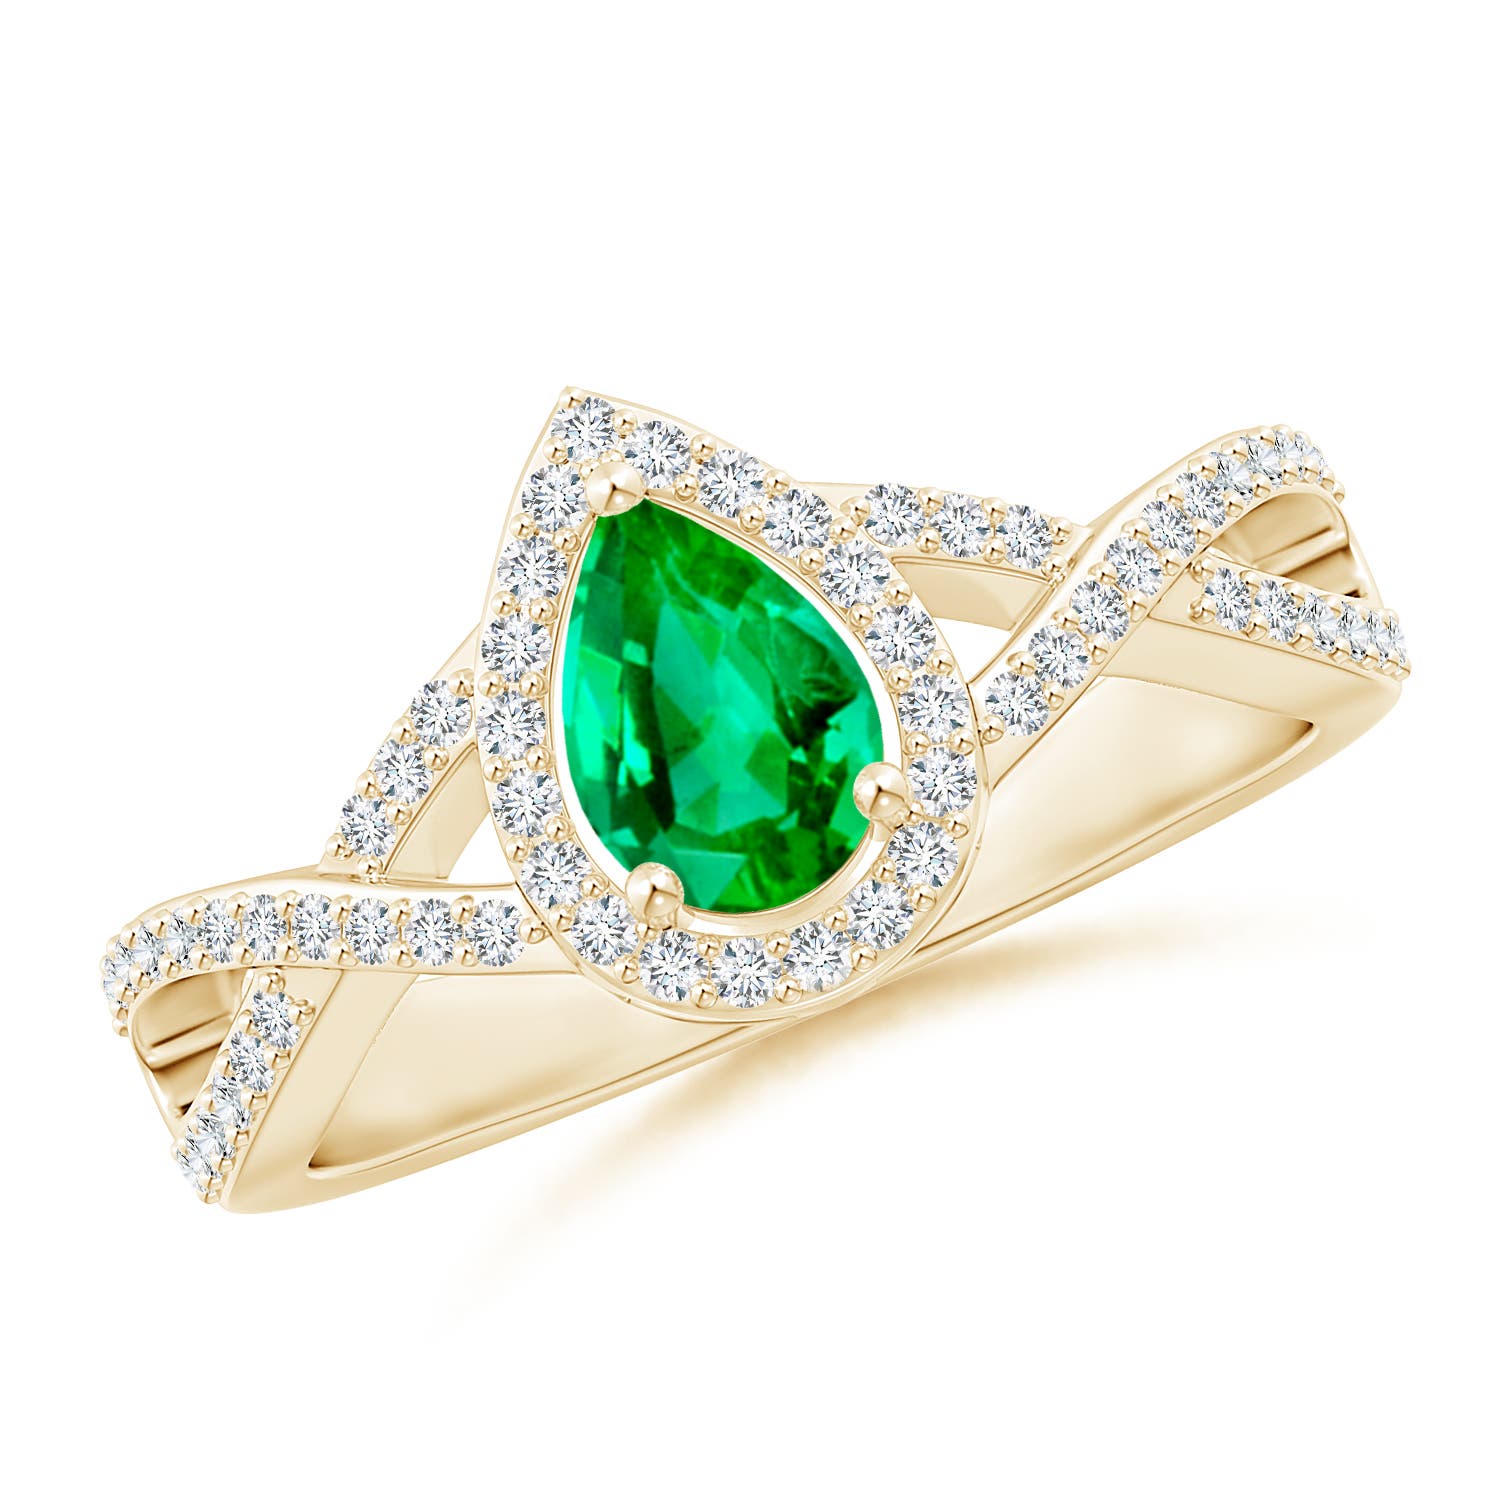 AAA - Emerald / 0.65 CT / 14 KT Yellow Gold